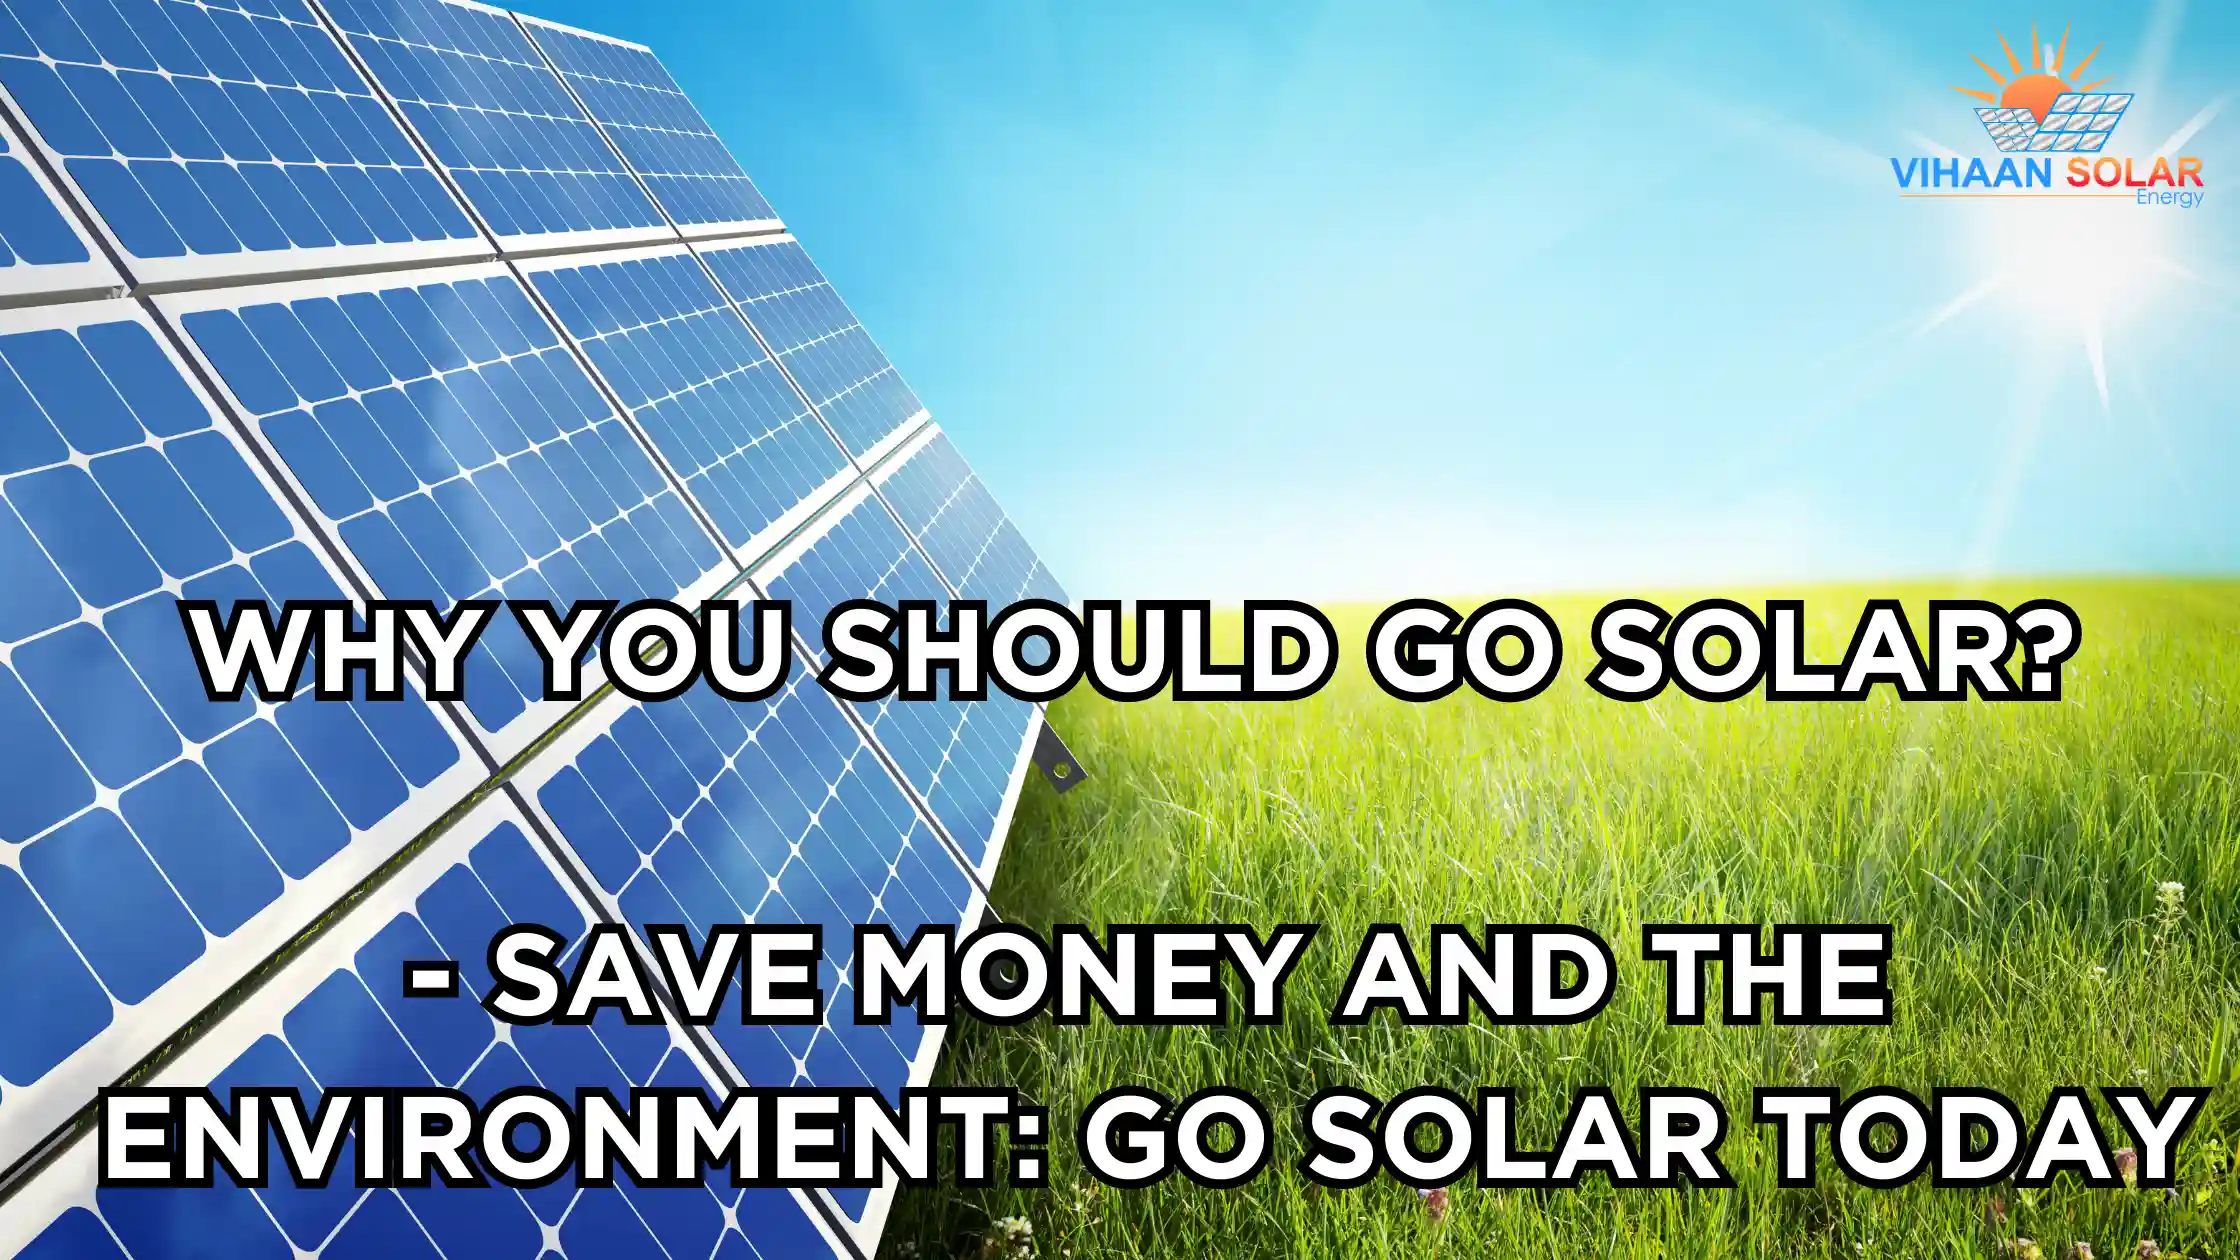 Why You Should Go Solar? - Save Money and the Environment: Go Solar Today